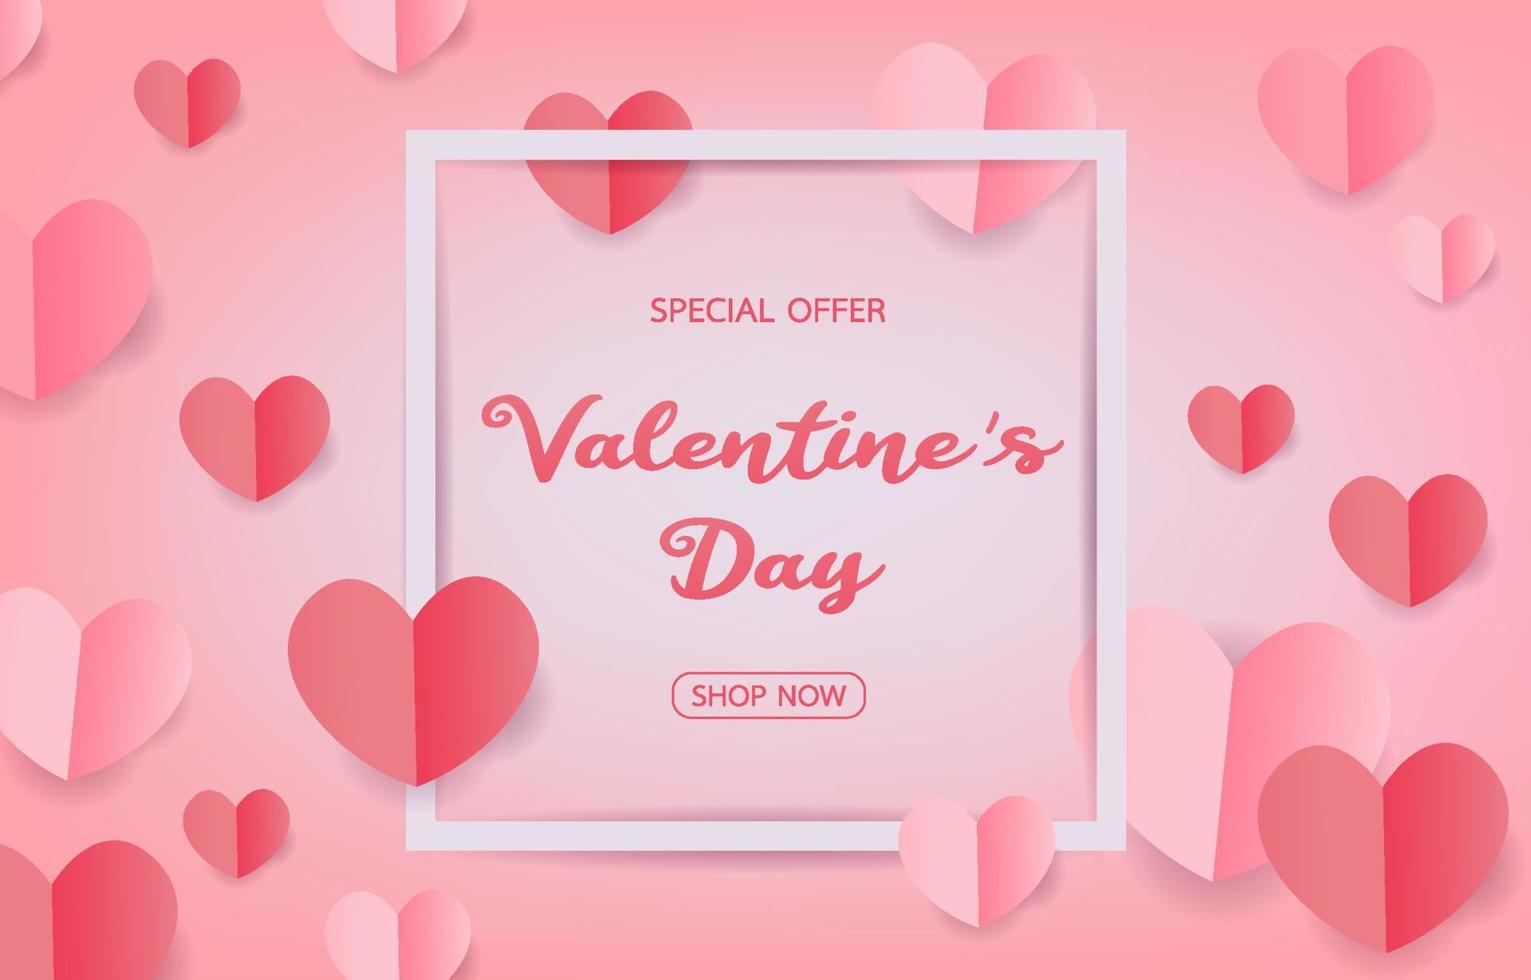 Valentine's Day concept design for web and shopping apps. Promotional and discount cards. The love theme is Pink and red tones. Heart made of paper.Paper art style design for Banner, advertisement vector